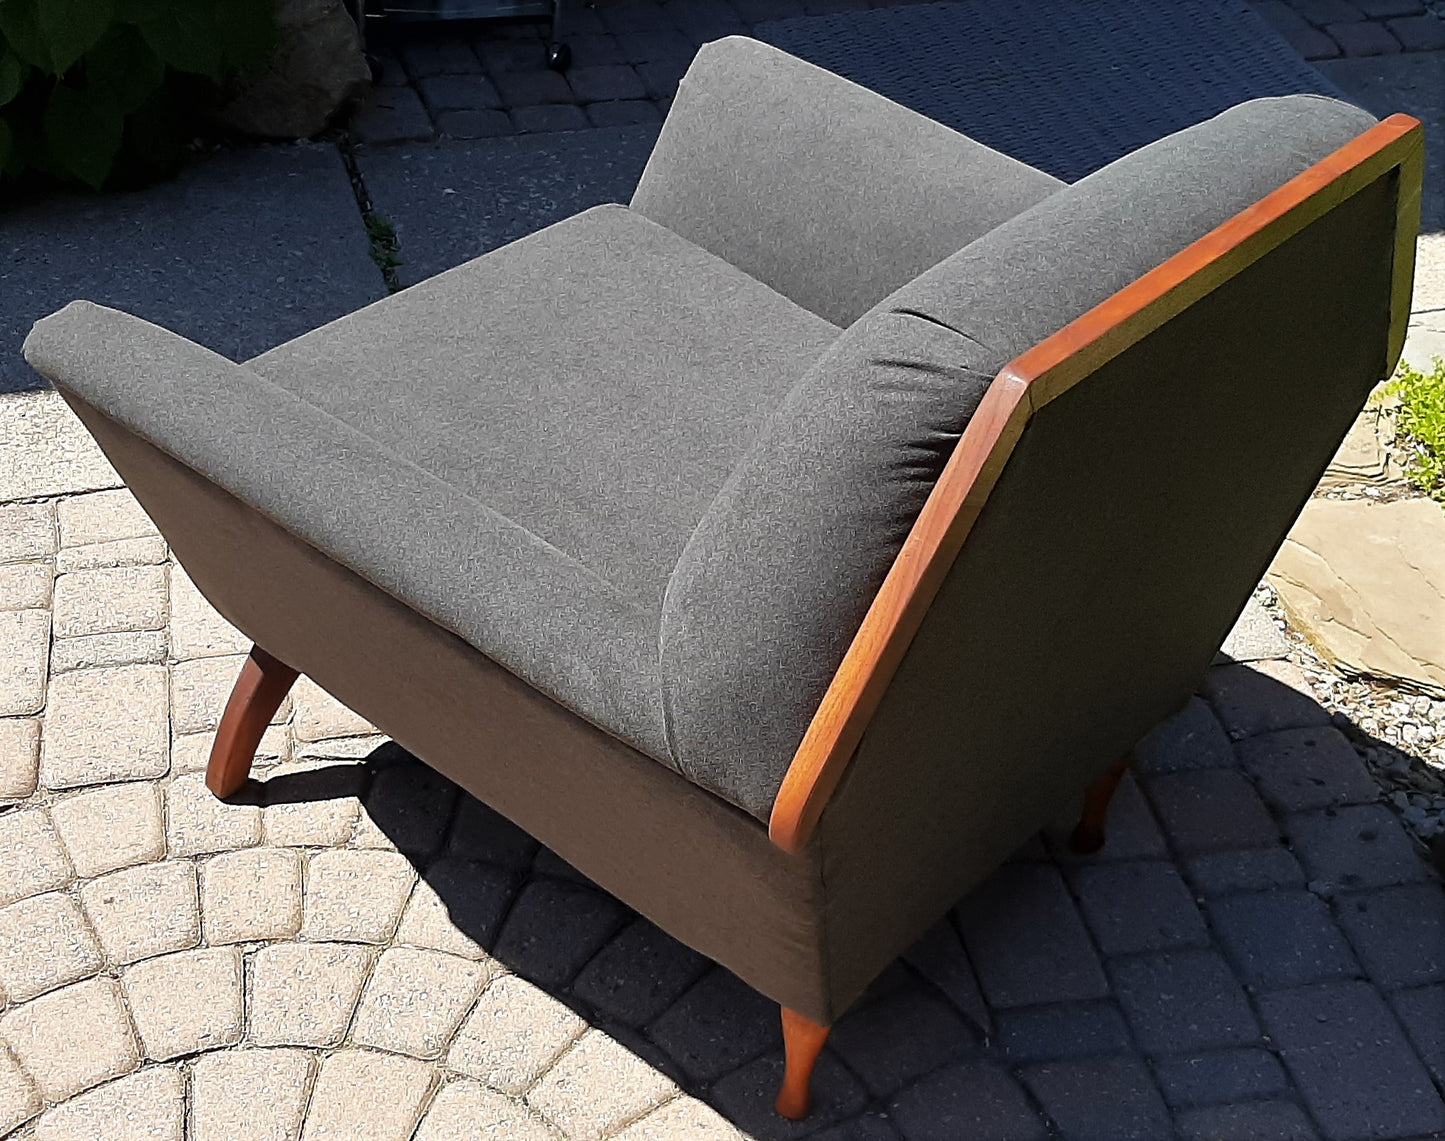 REFINISHED MCM Walnut lounge chair w NEW charcoal wool upholstery & spring base, Perfect